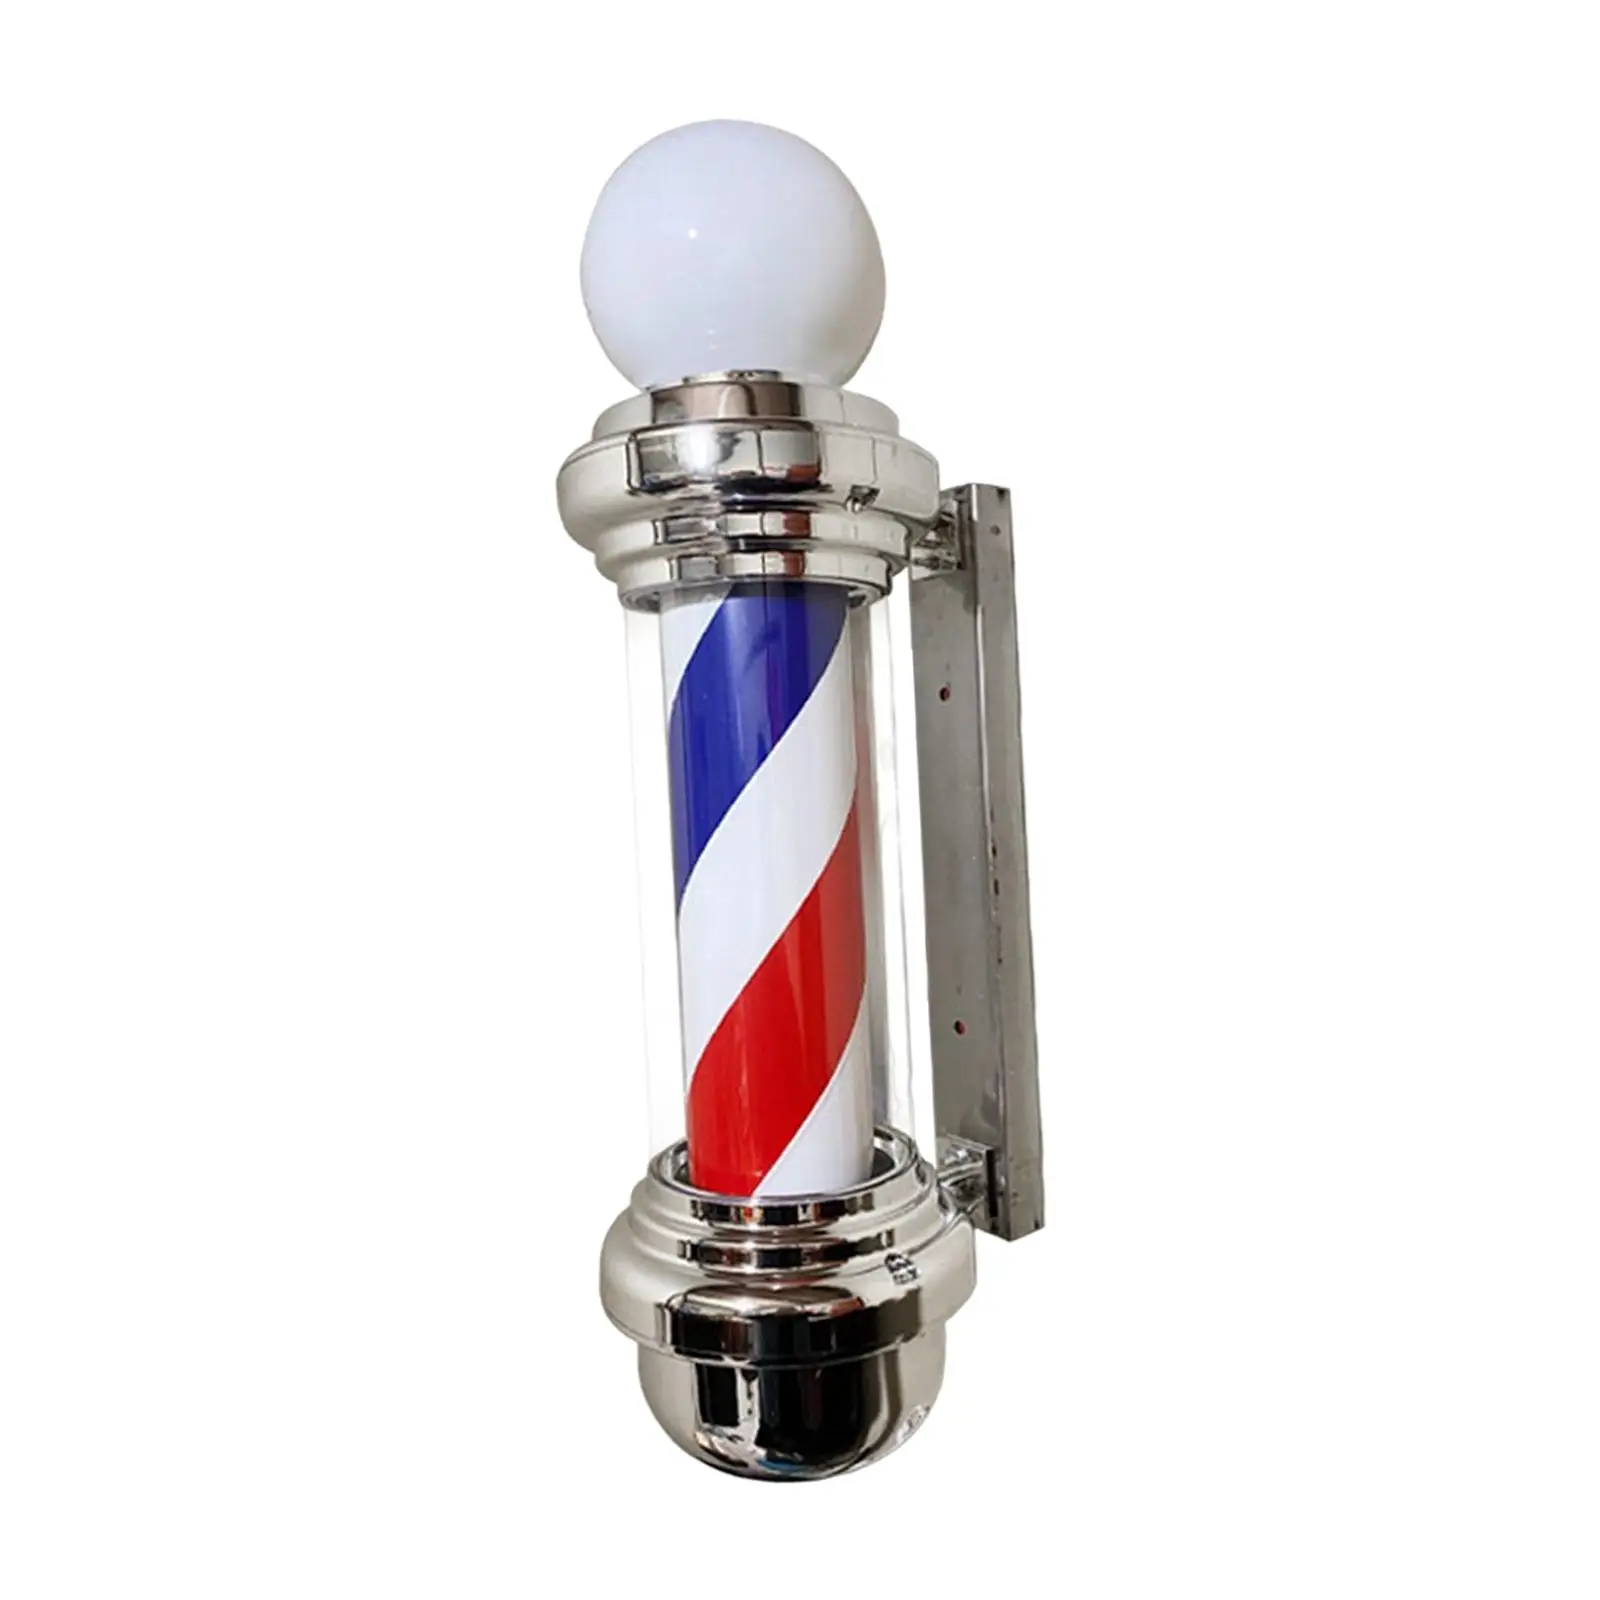 Barber Pole LED Light Rotating Hair Salon Shop Sign Light Waterproof Wall Mounted with Ball for Indoor Hairdressing Outdoor